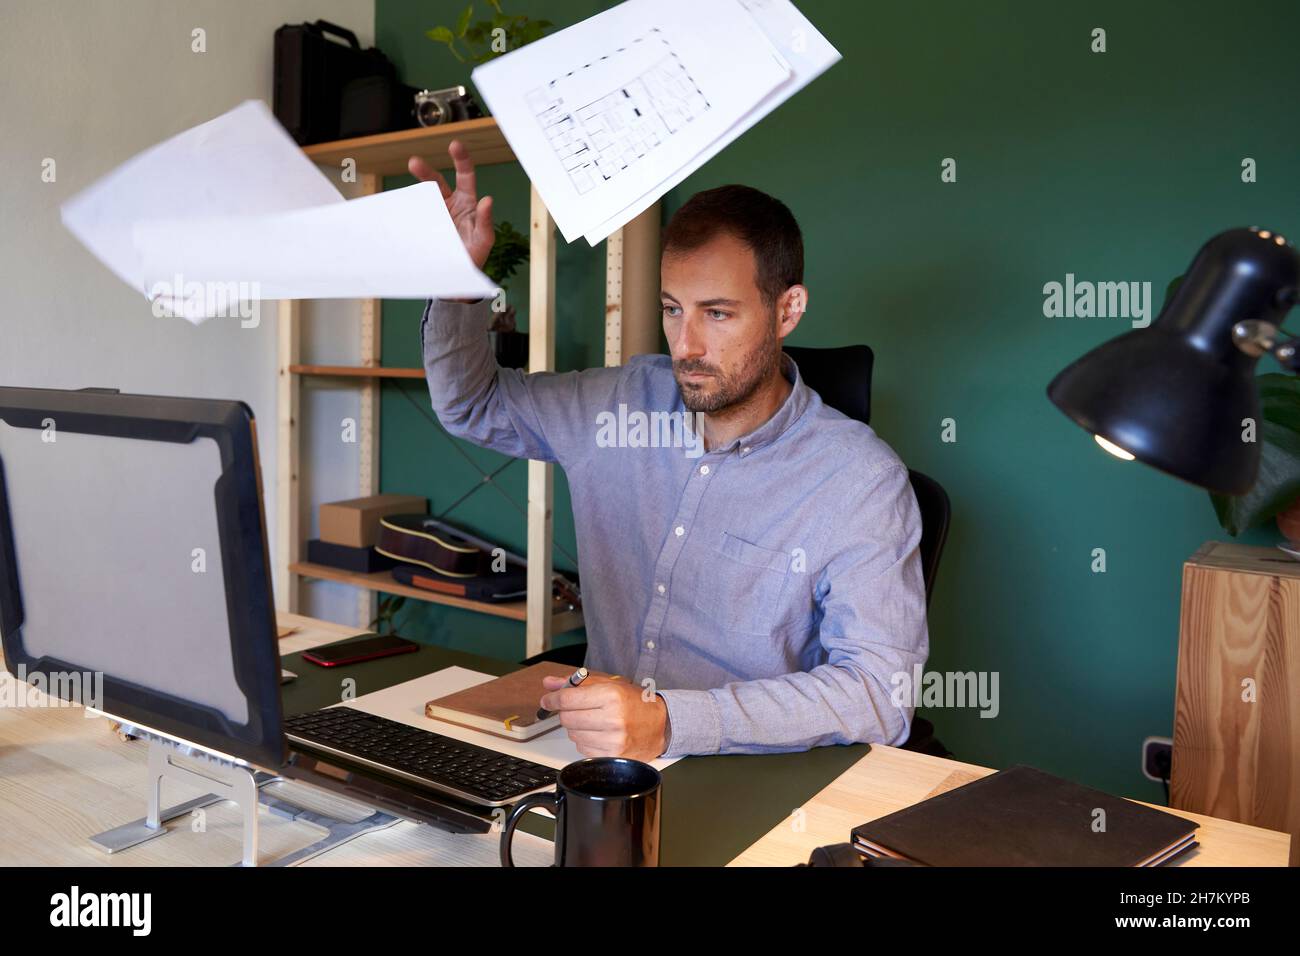 Overworked freelancer throwing documents at home office Stock Photo